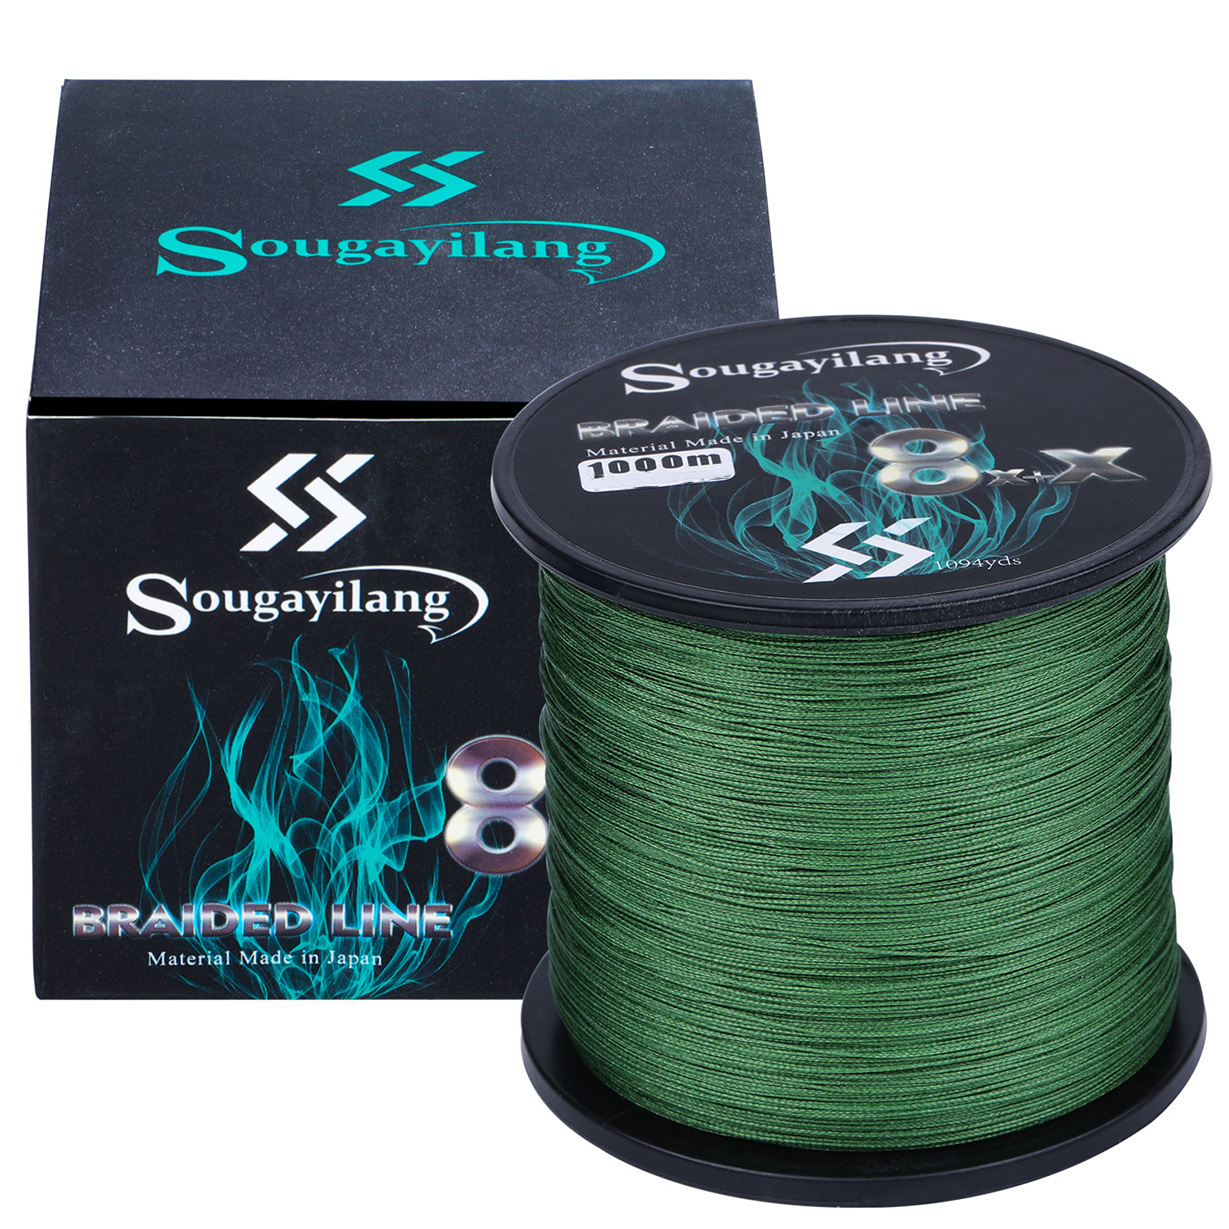 SOUGAYILANG 9 Strands PE Braided Fishing Line - Strong, Wear-Resistant  String for Saltwater and Freshwater Fishing (328/547/1094 Yds)